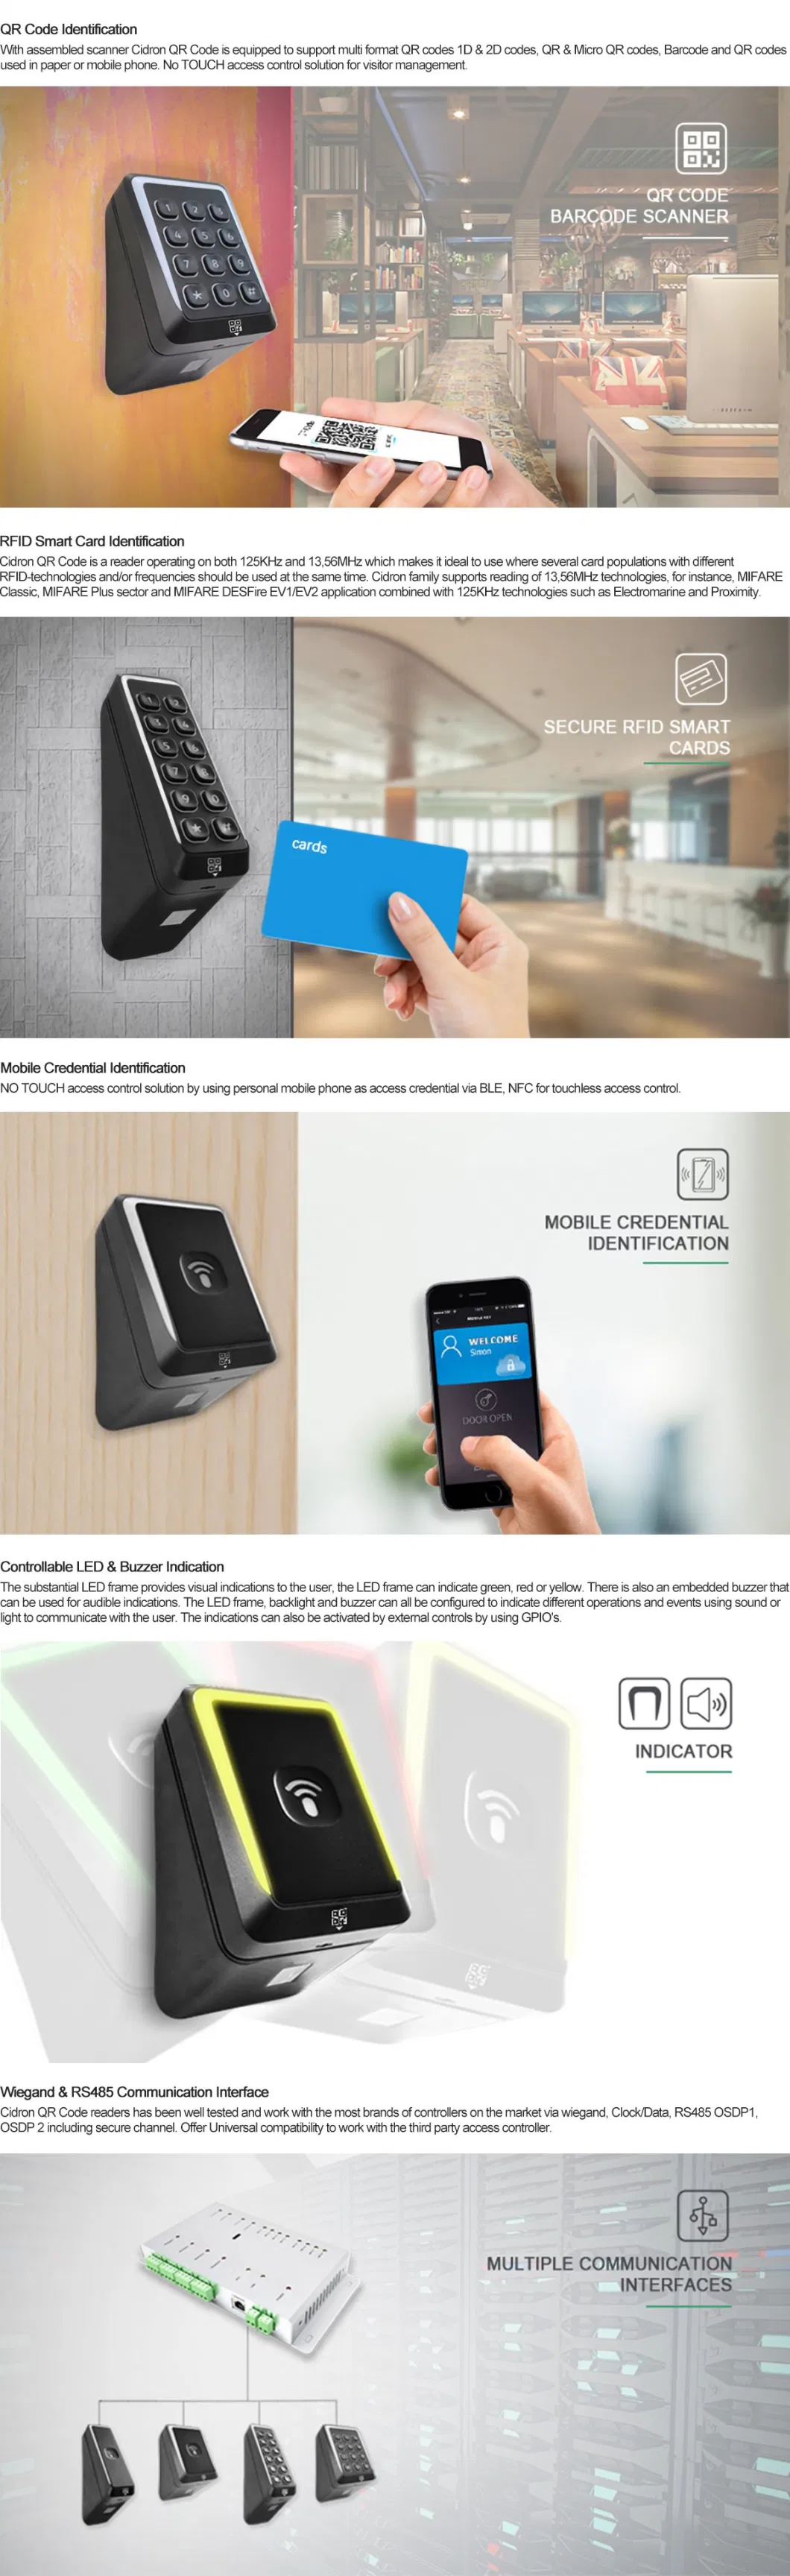 RS485 Barcode Scanner Qr Code Scanner with NFC RFID Multi Smart Card Reader in Dual Frequency